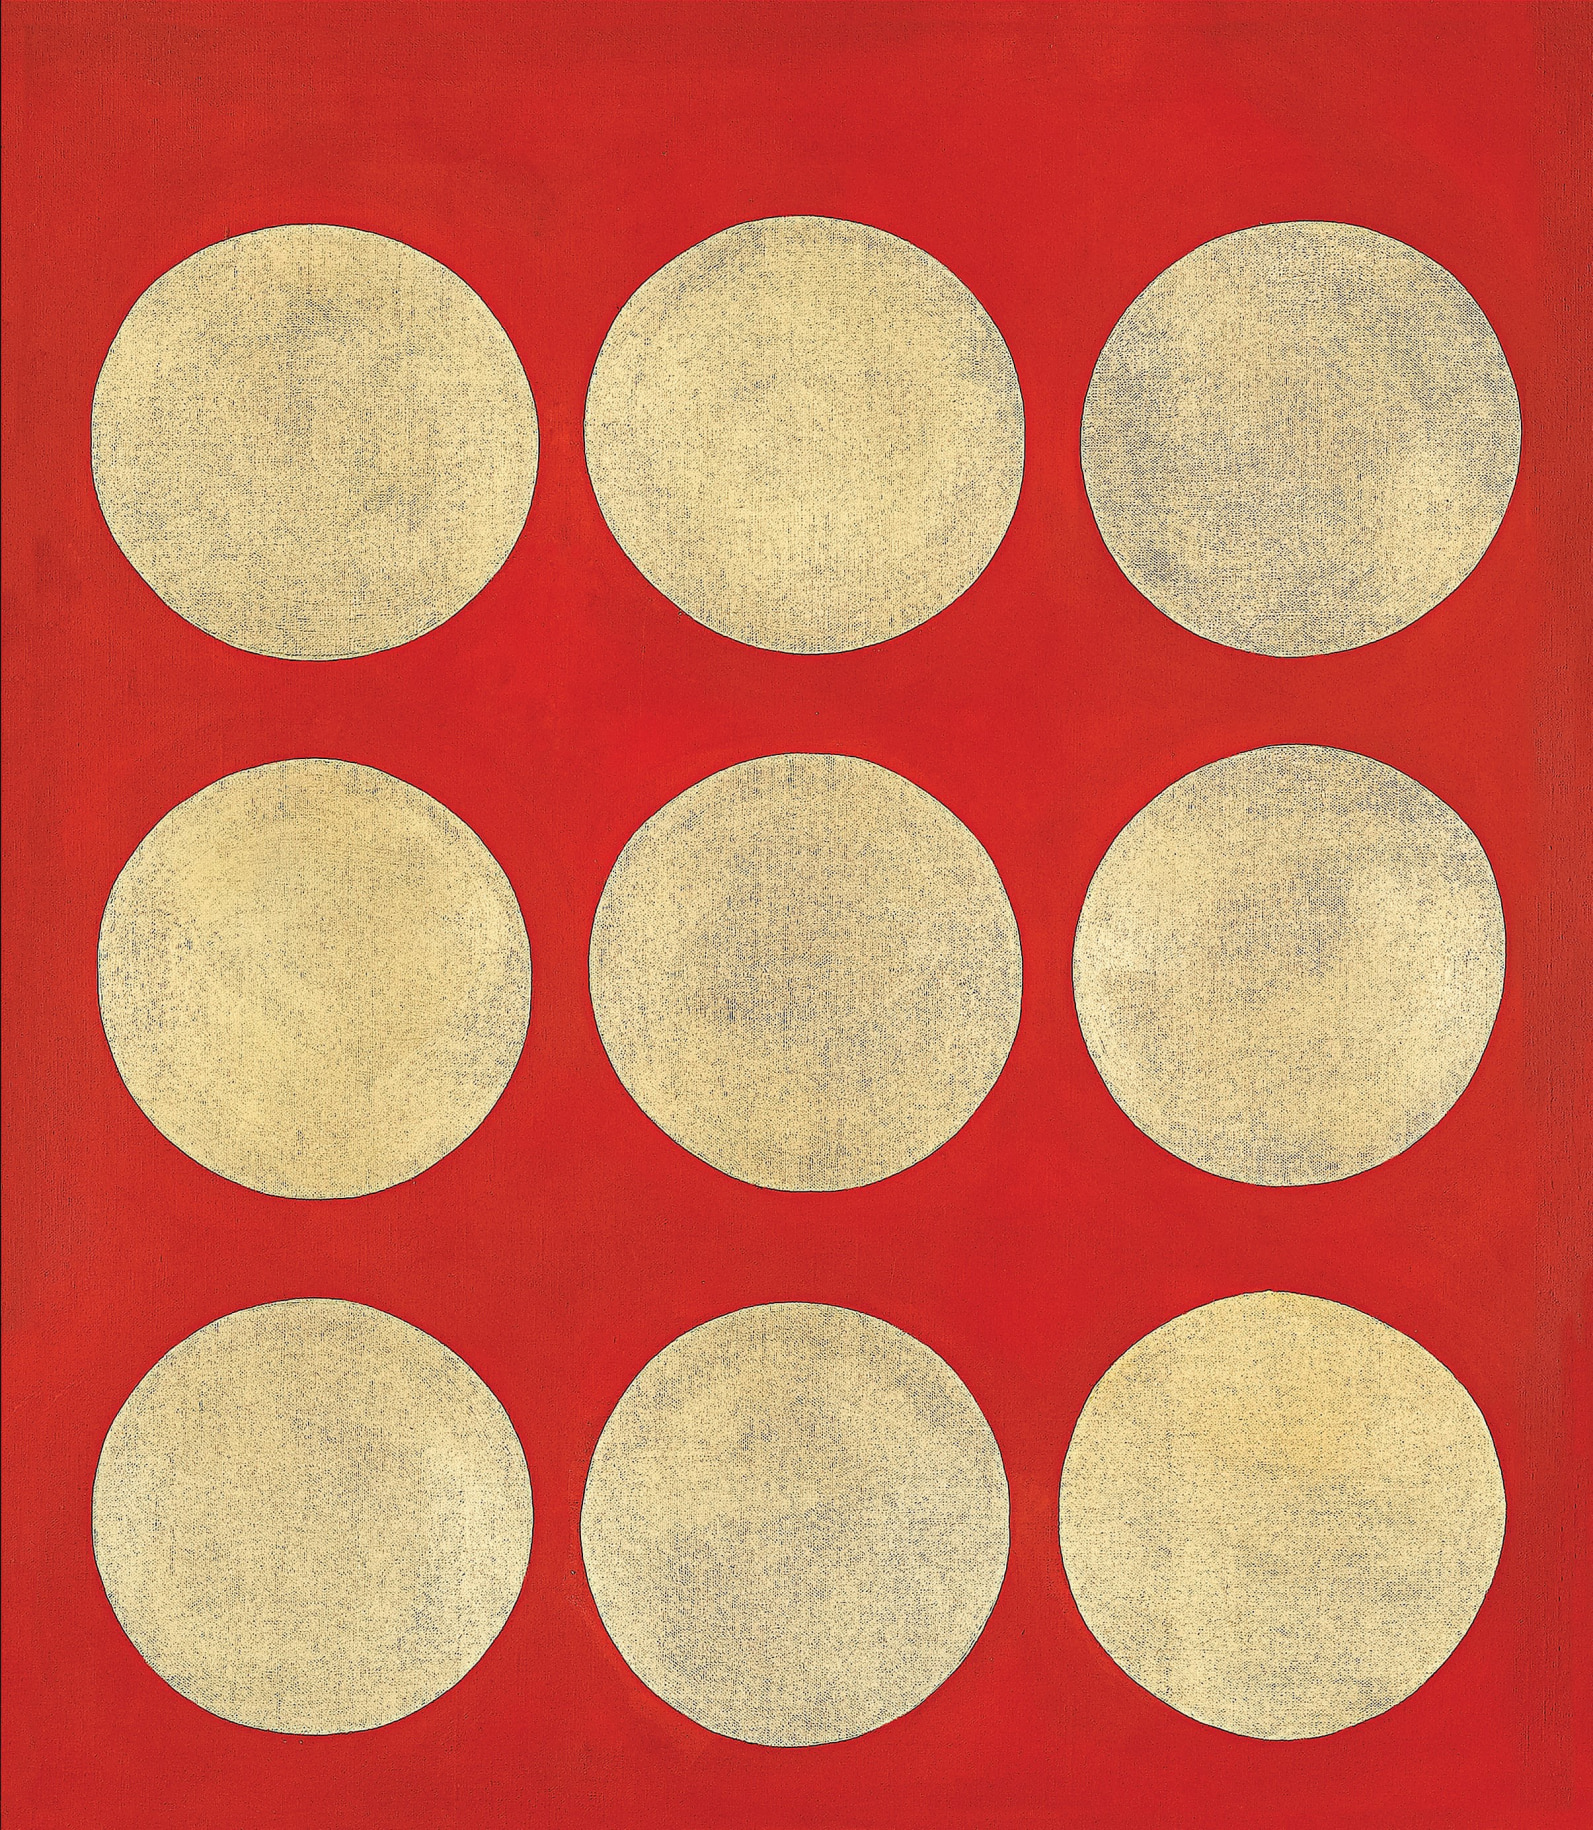 a painting of three horizontal rows of three golden orbs against a red background